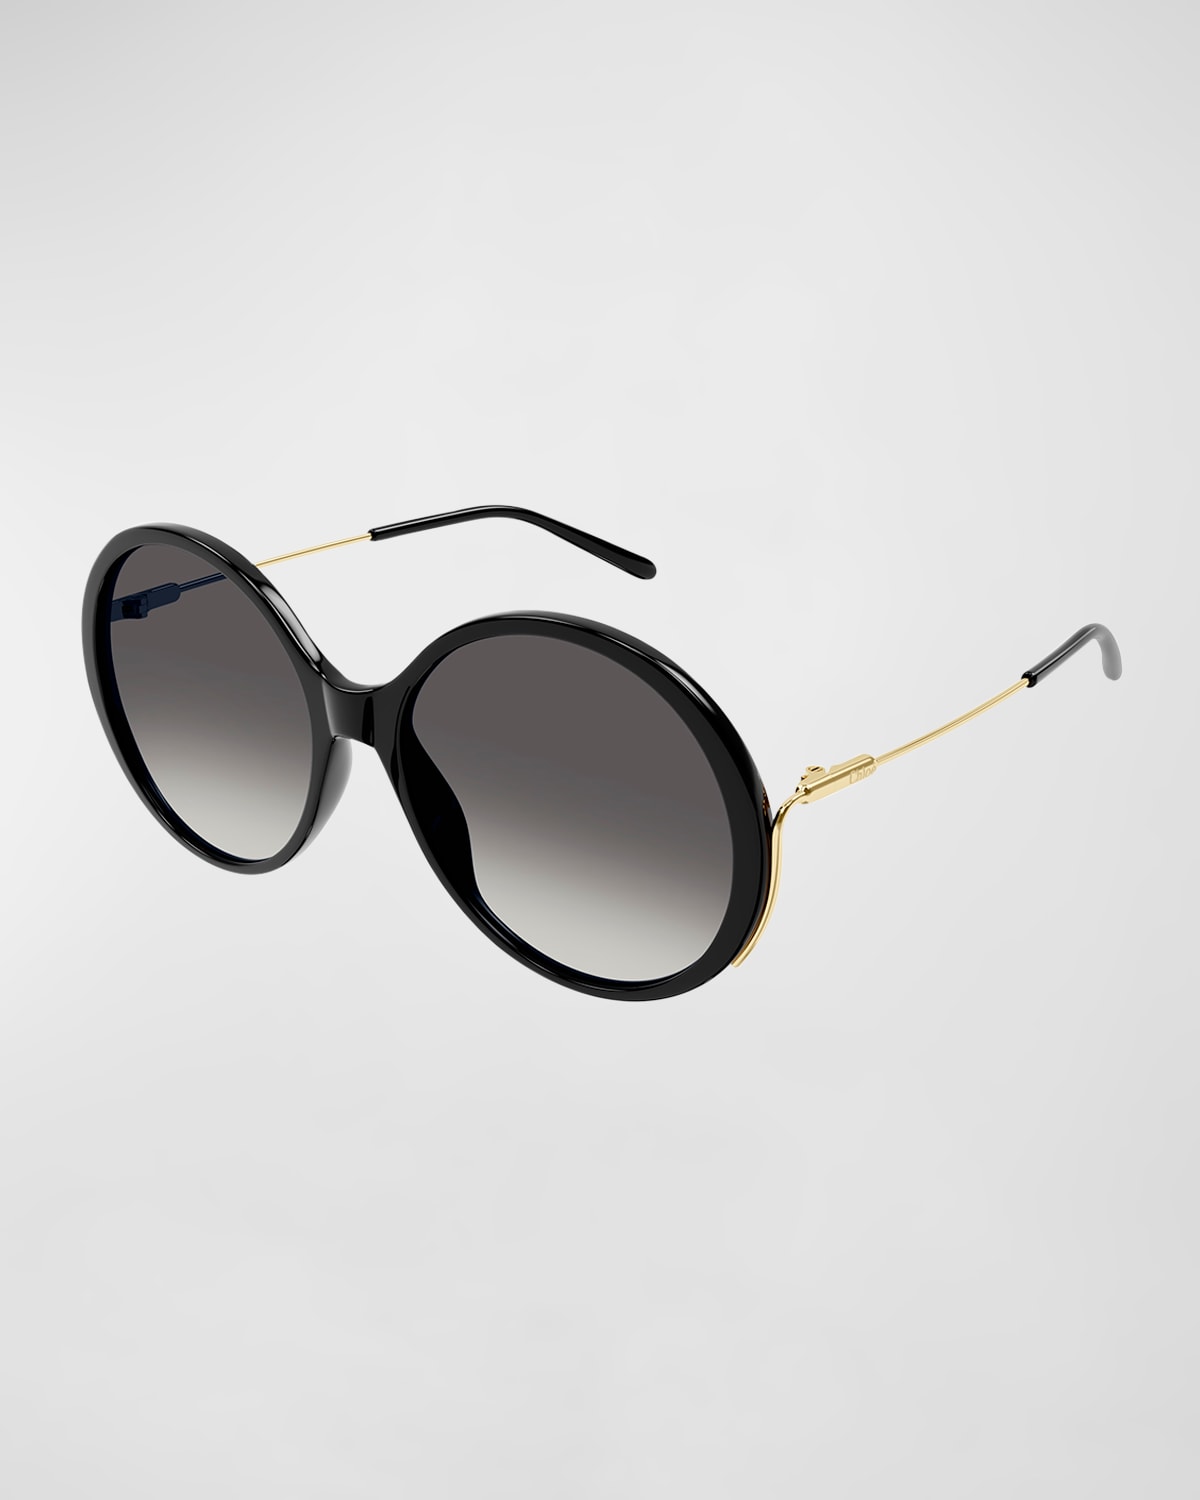 Oversized Round Acetate and Metal Sunglasses